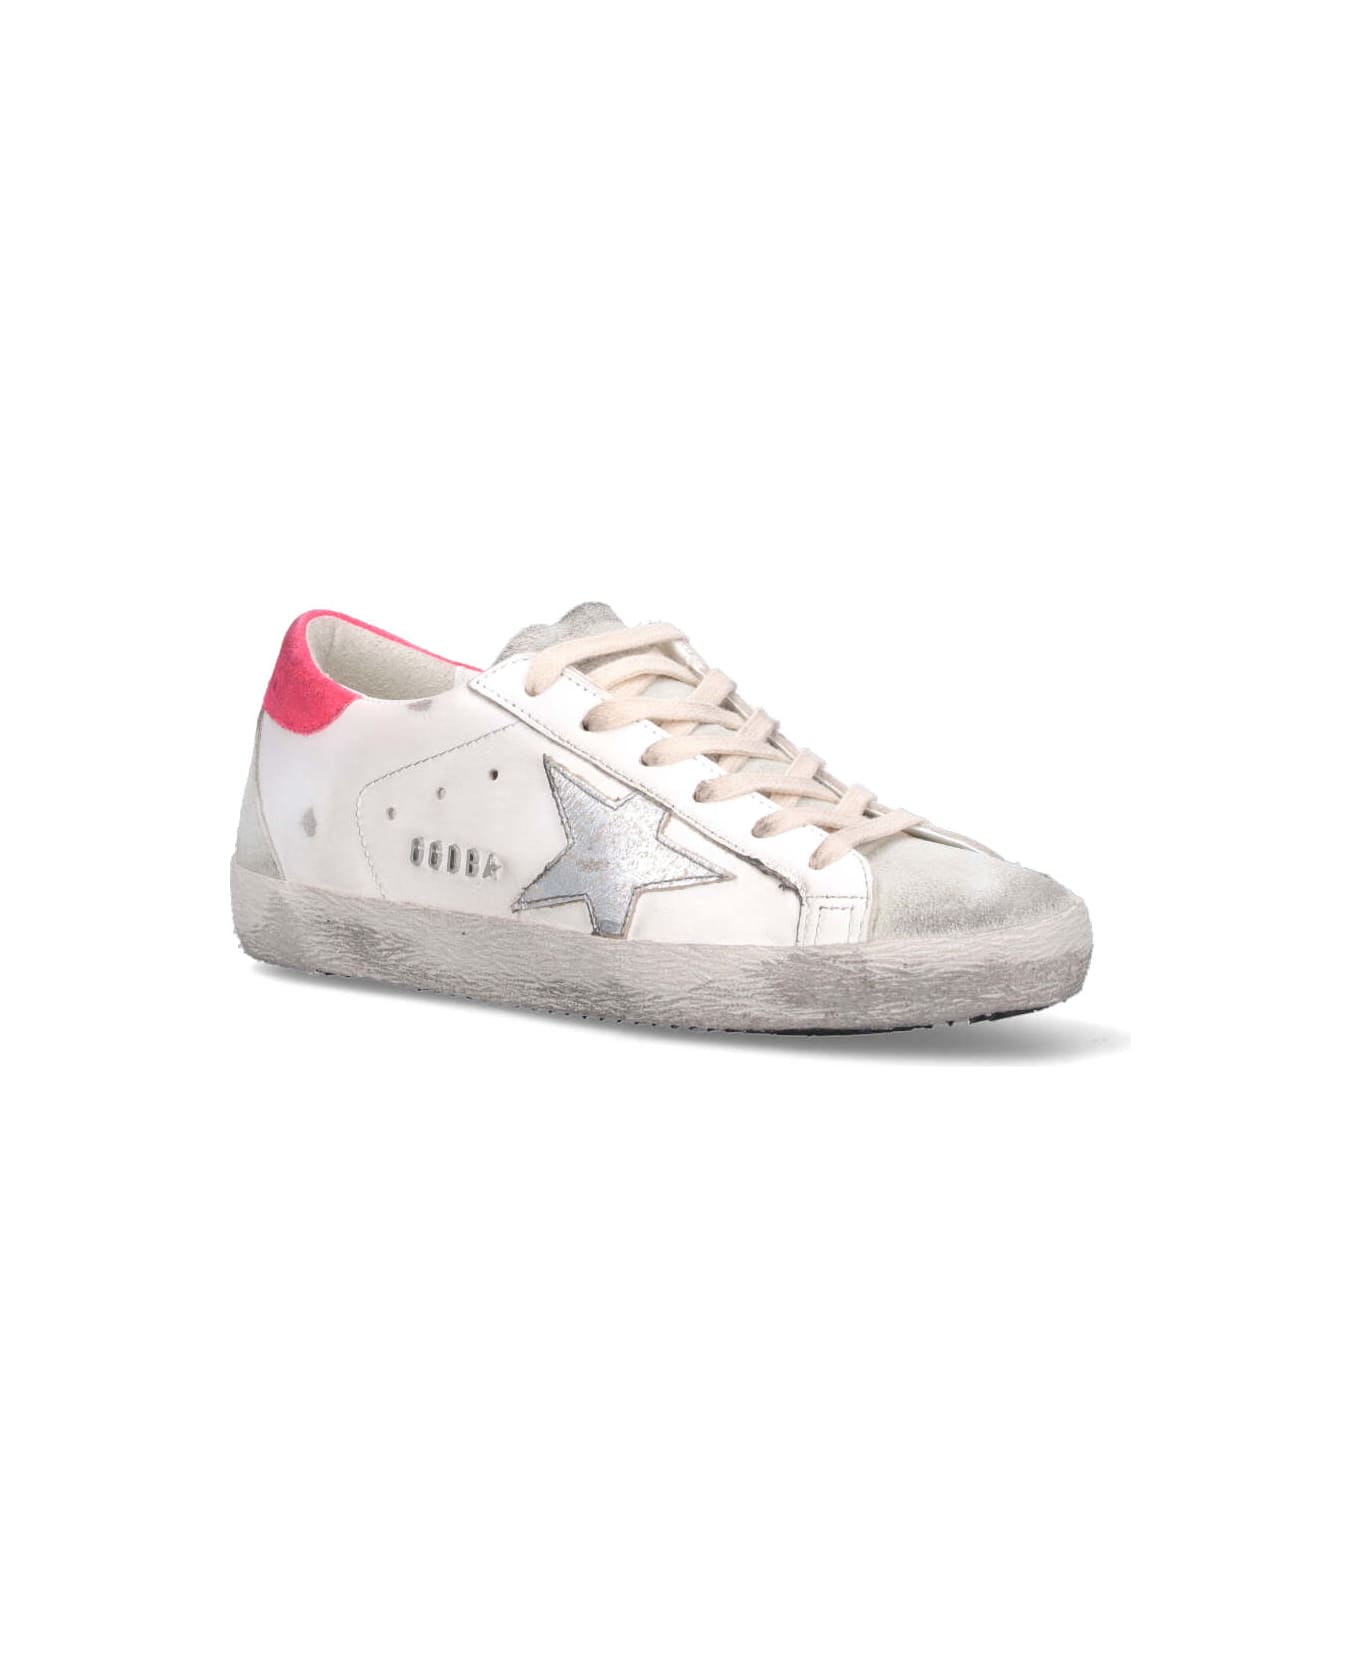 Golden Goose Superstar Classic Sneakers - WHITE/ICE スニーカー